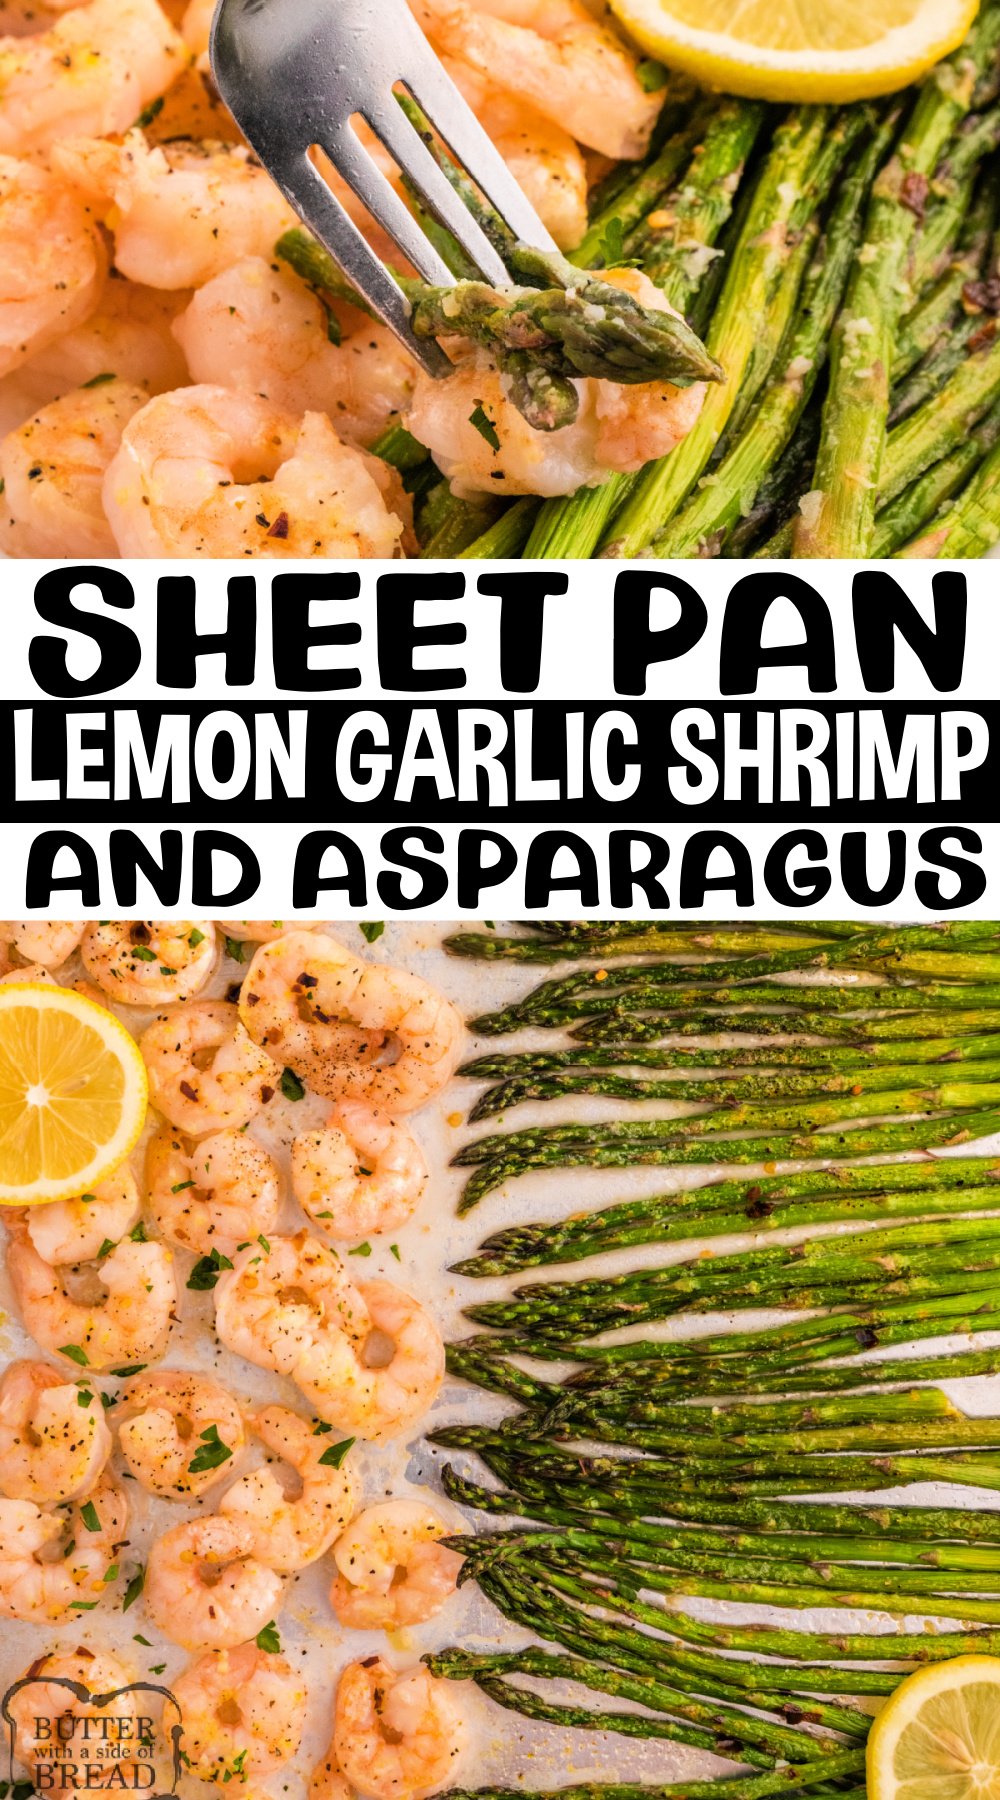 Sheet Pan Lemon Garlic Shrimp and Asparagus is a simple dinner ready in less than 30 minutes. A one-dish meal that is easy and delicious.